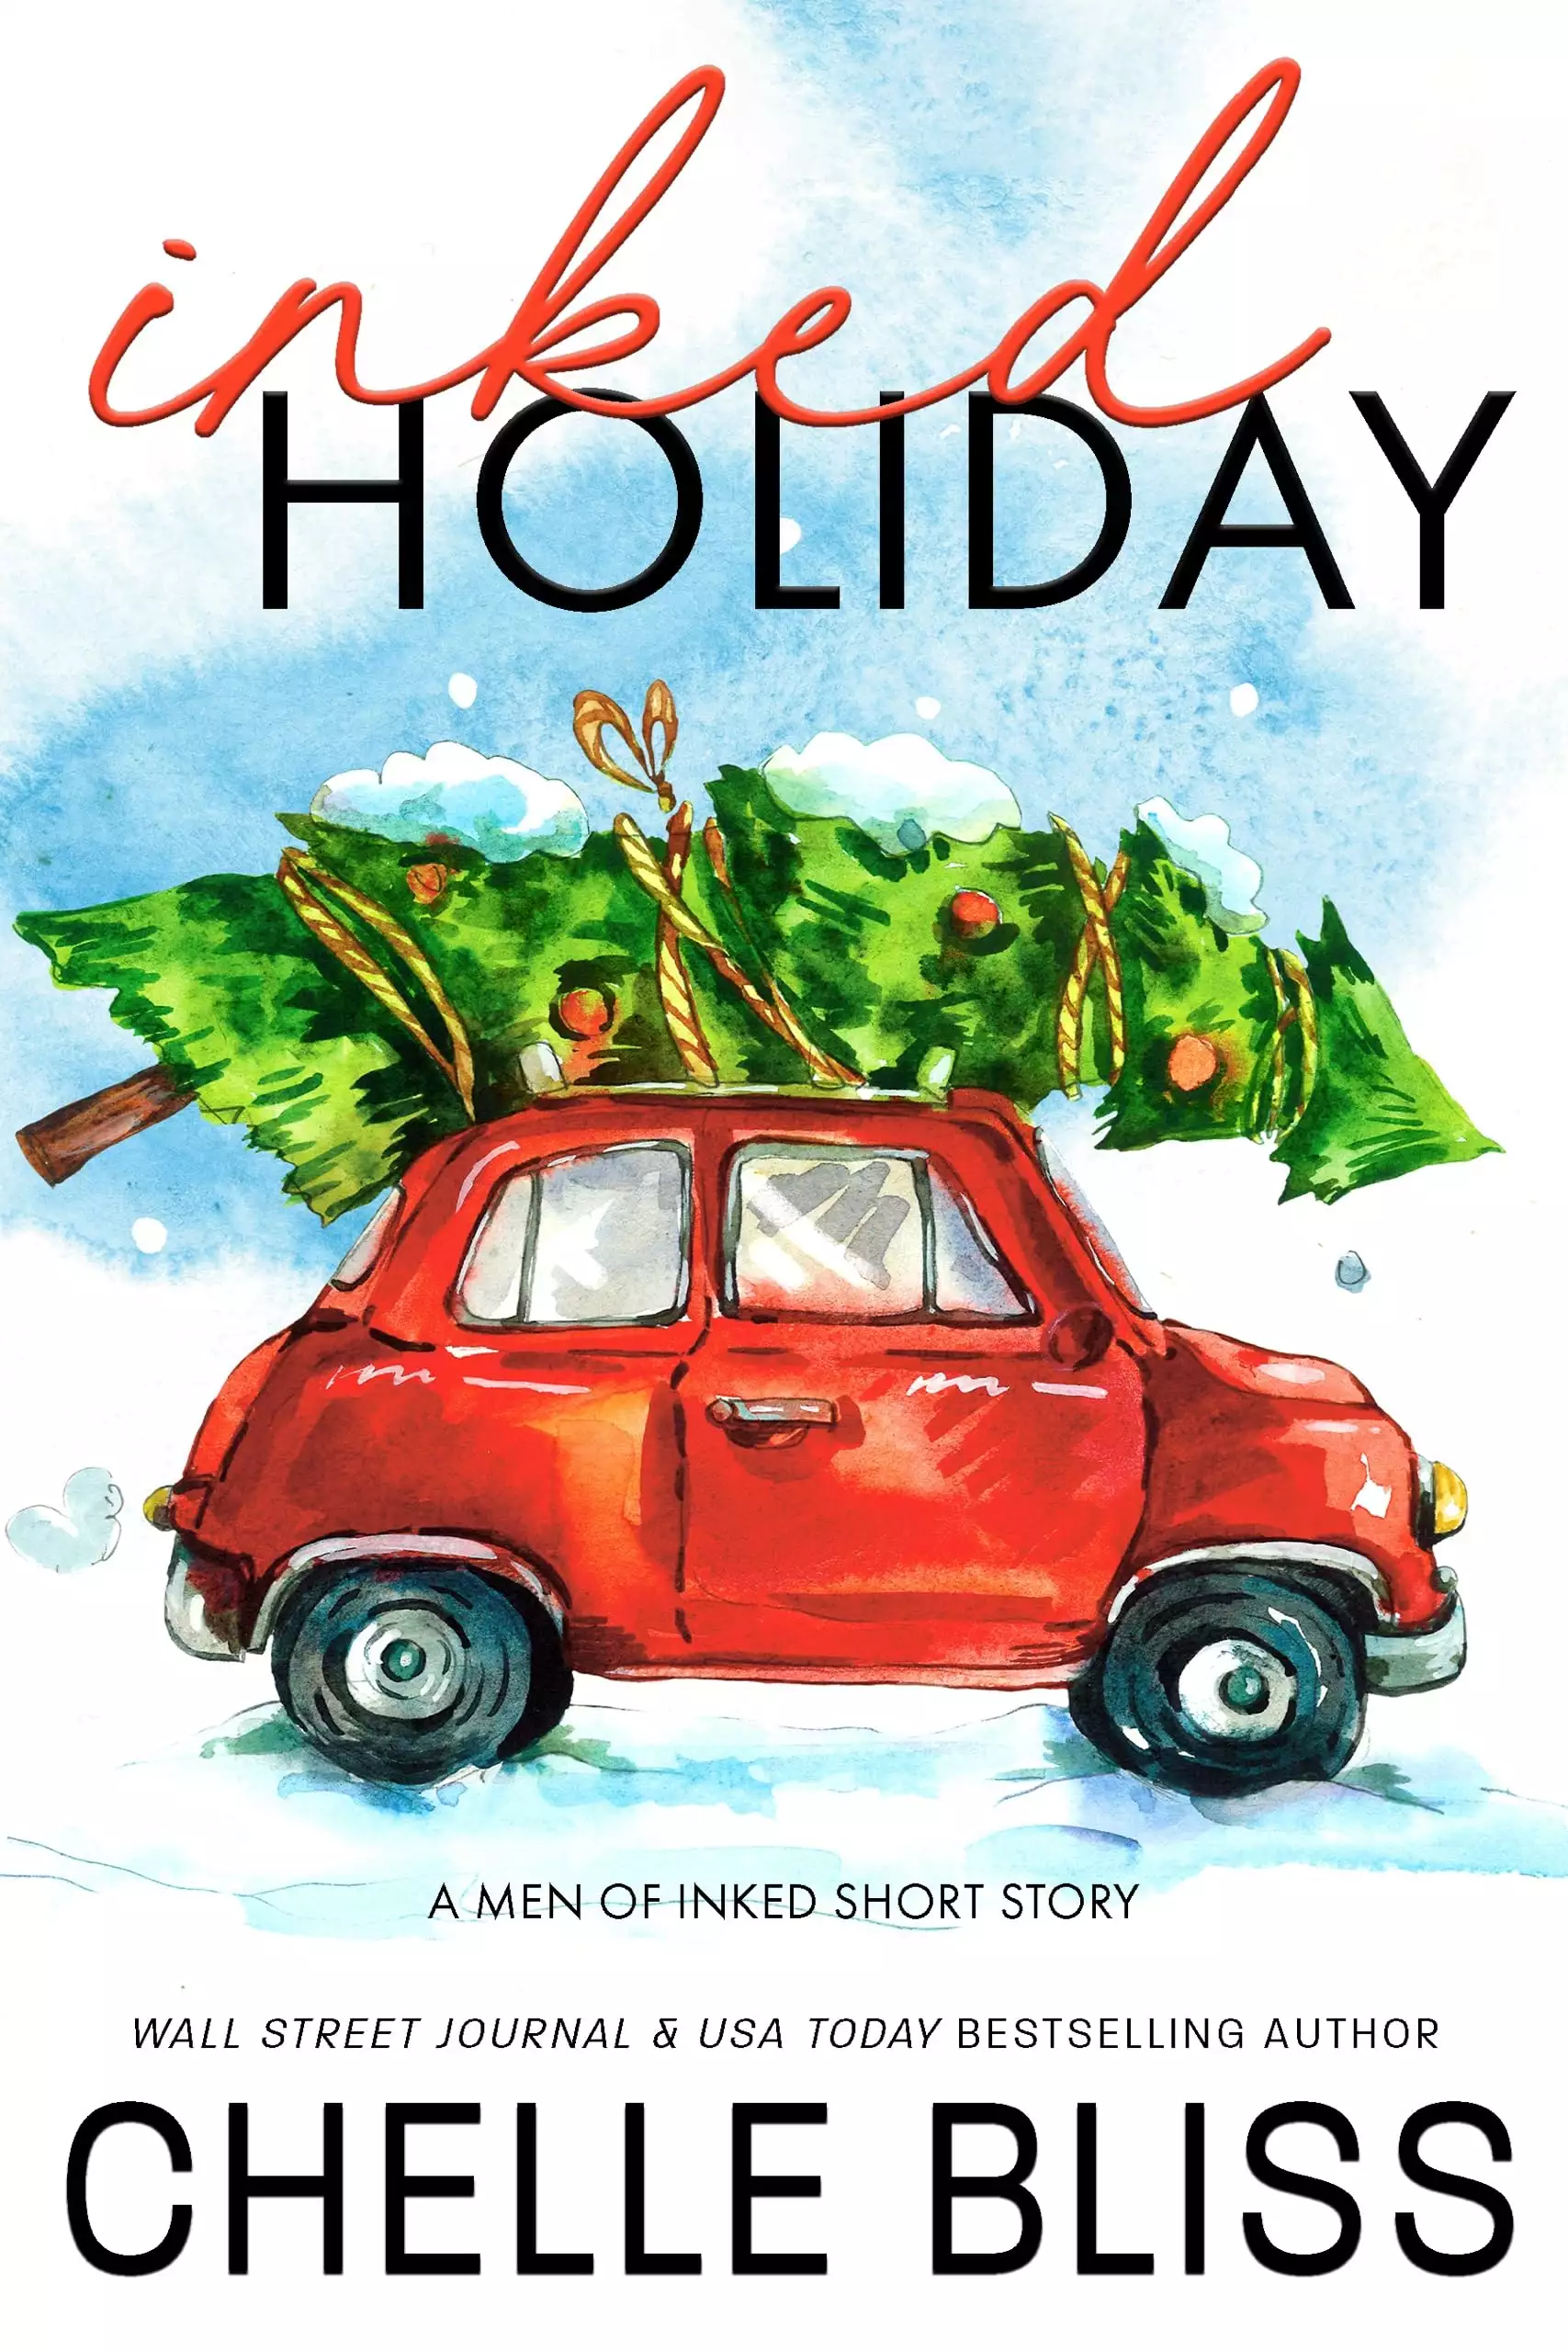 Inked Holiday: A Men of Inked Short Story